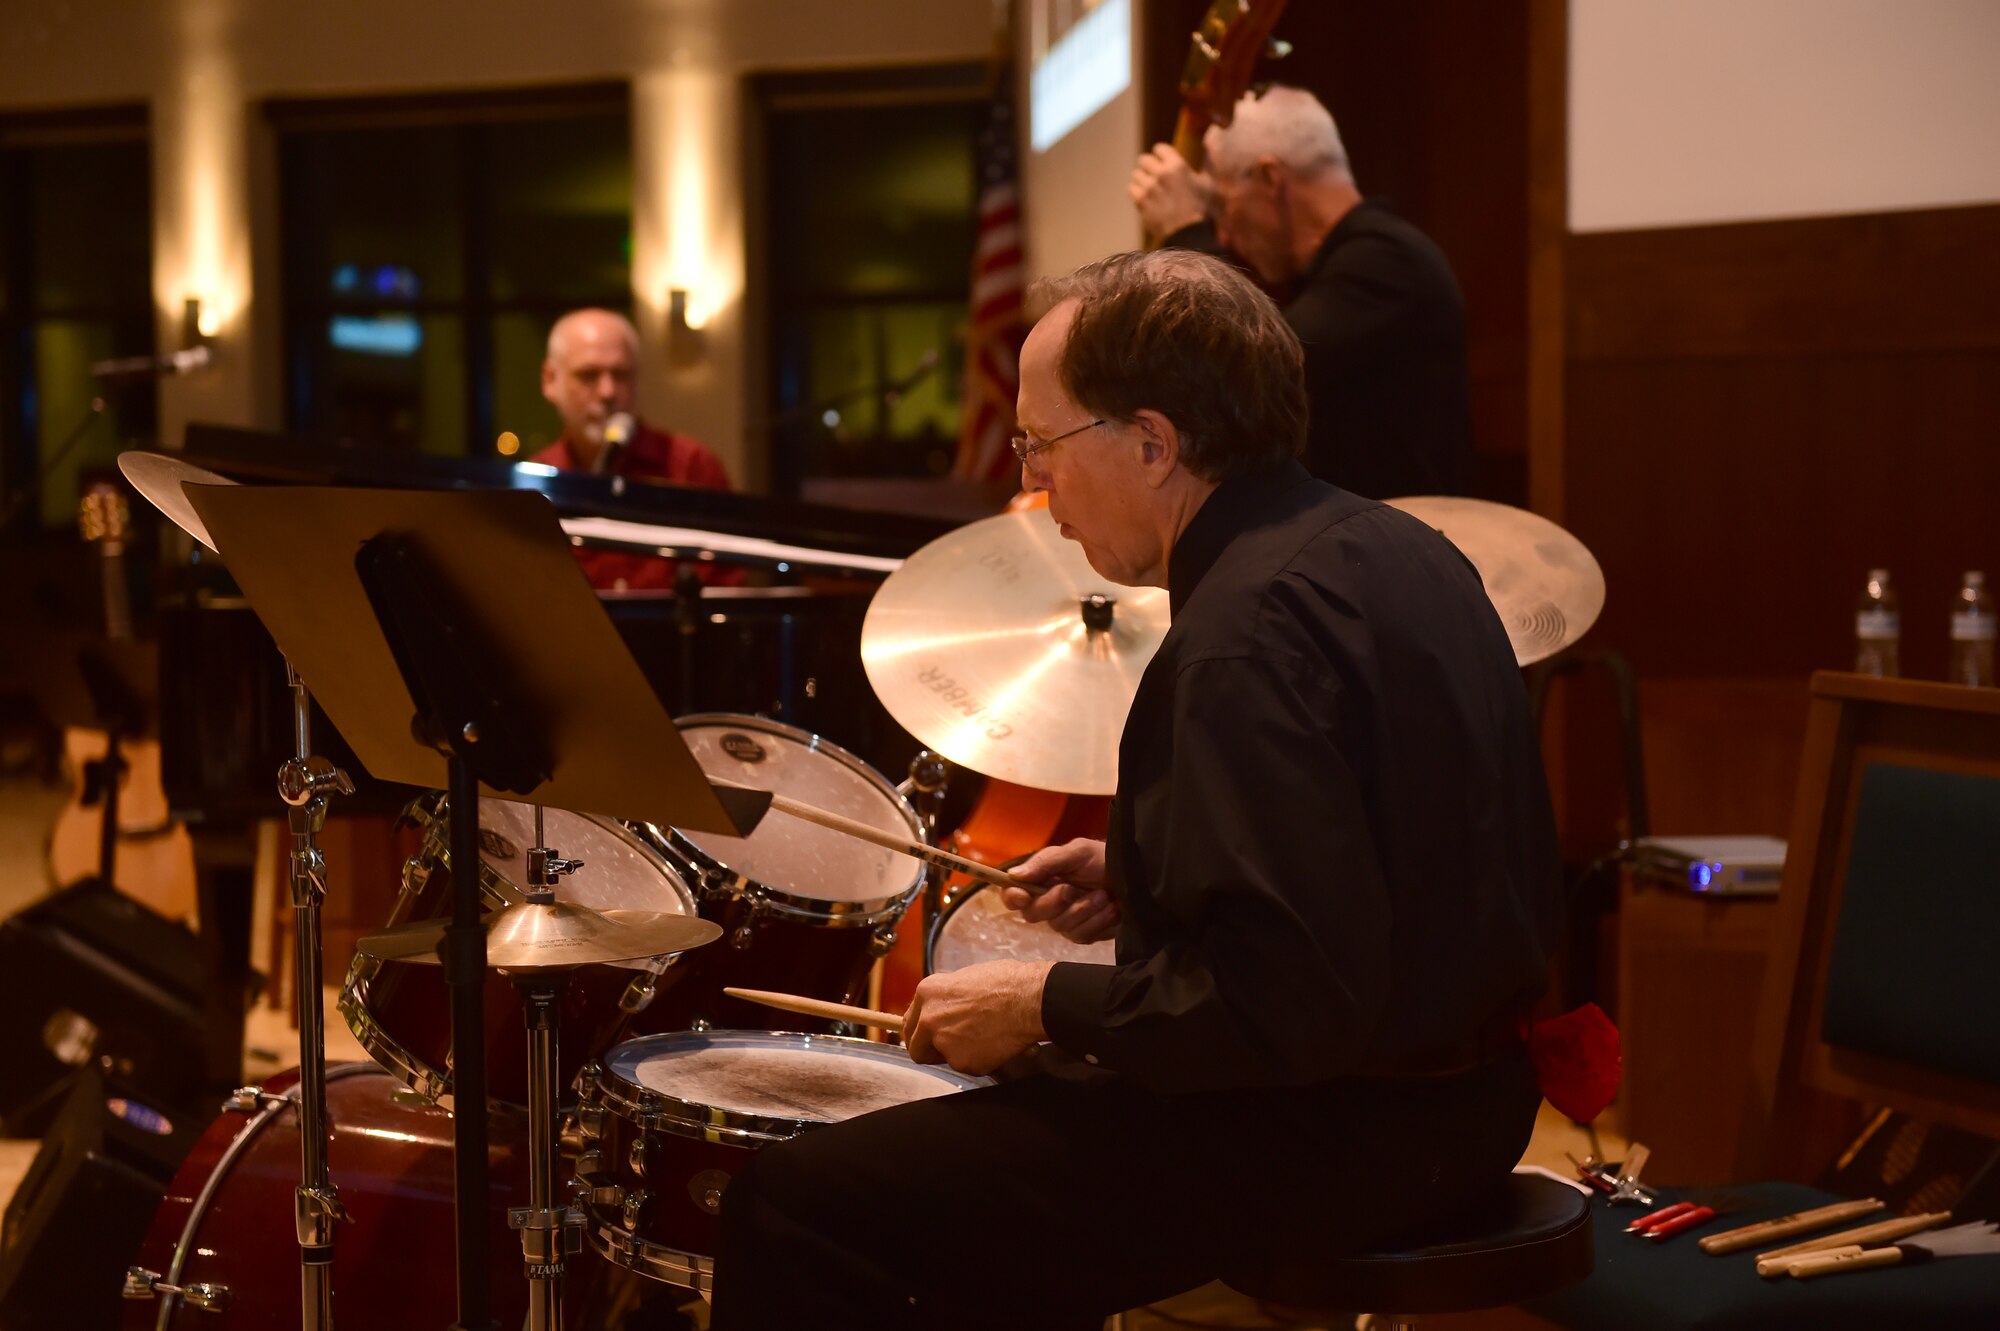 Danny Byram and his band play for members of the Buckley community Feb. 12, 2016, at the Buckley Chapel on Buckley Air Force Base, Colo.  Nicknamed “The Combat Musician,” Byram has performed at more than 100 U.S. military installations worldwide, more than any other Christian musician. (U.S. Air Force photo by Airman 1st Class Luke W. Nowakowski/Released)